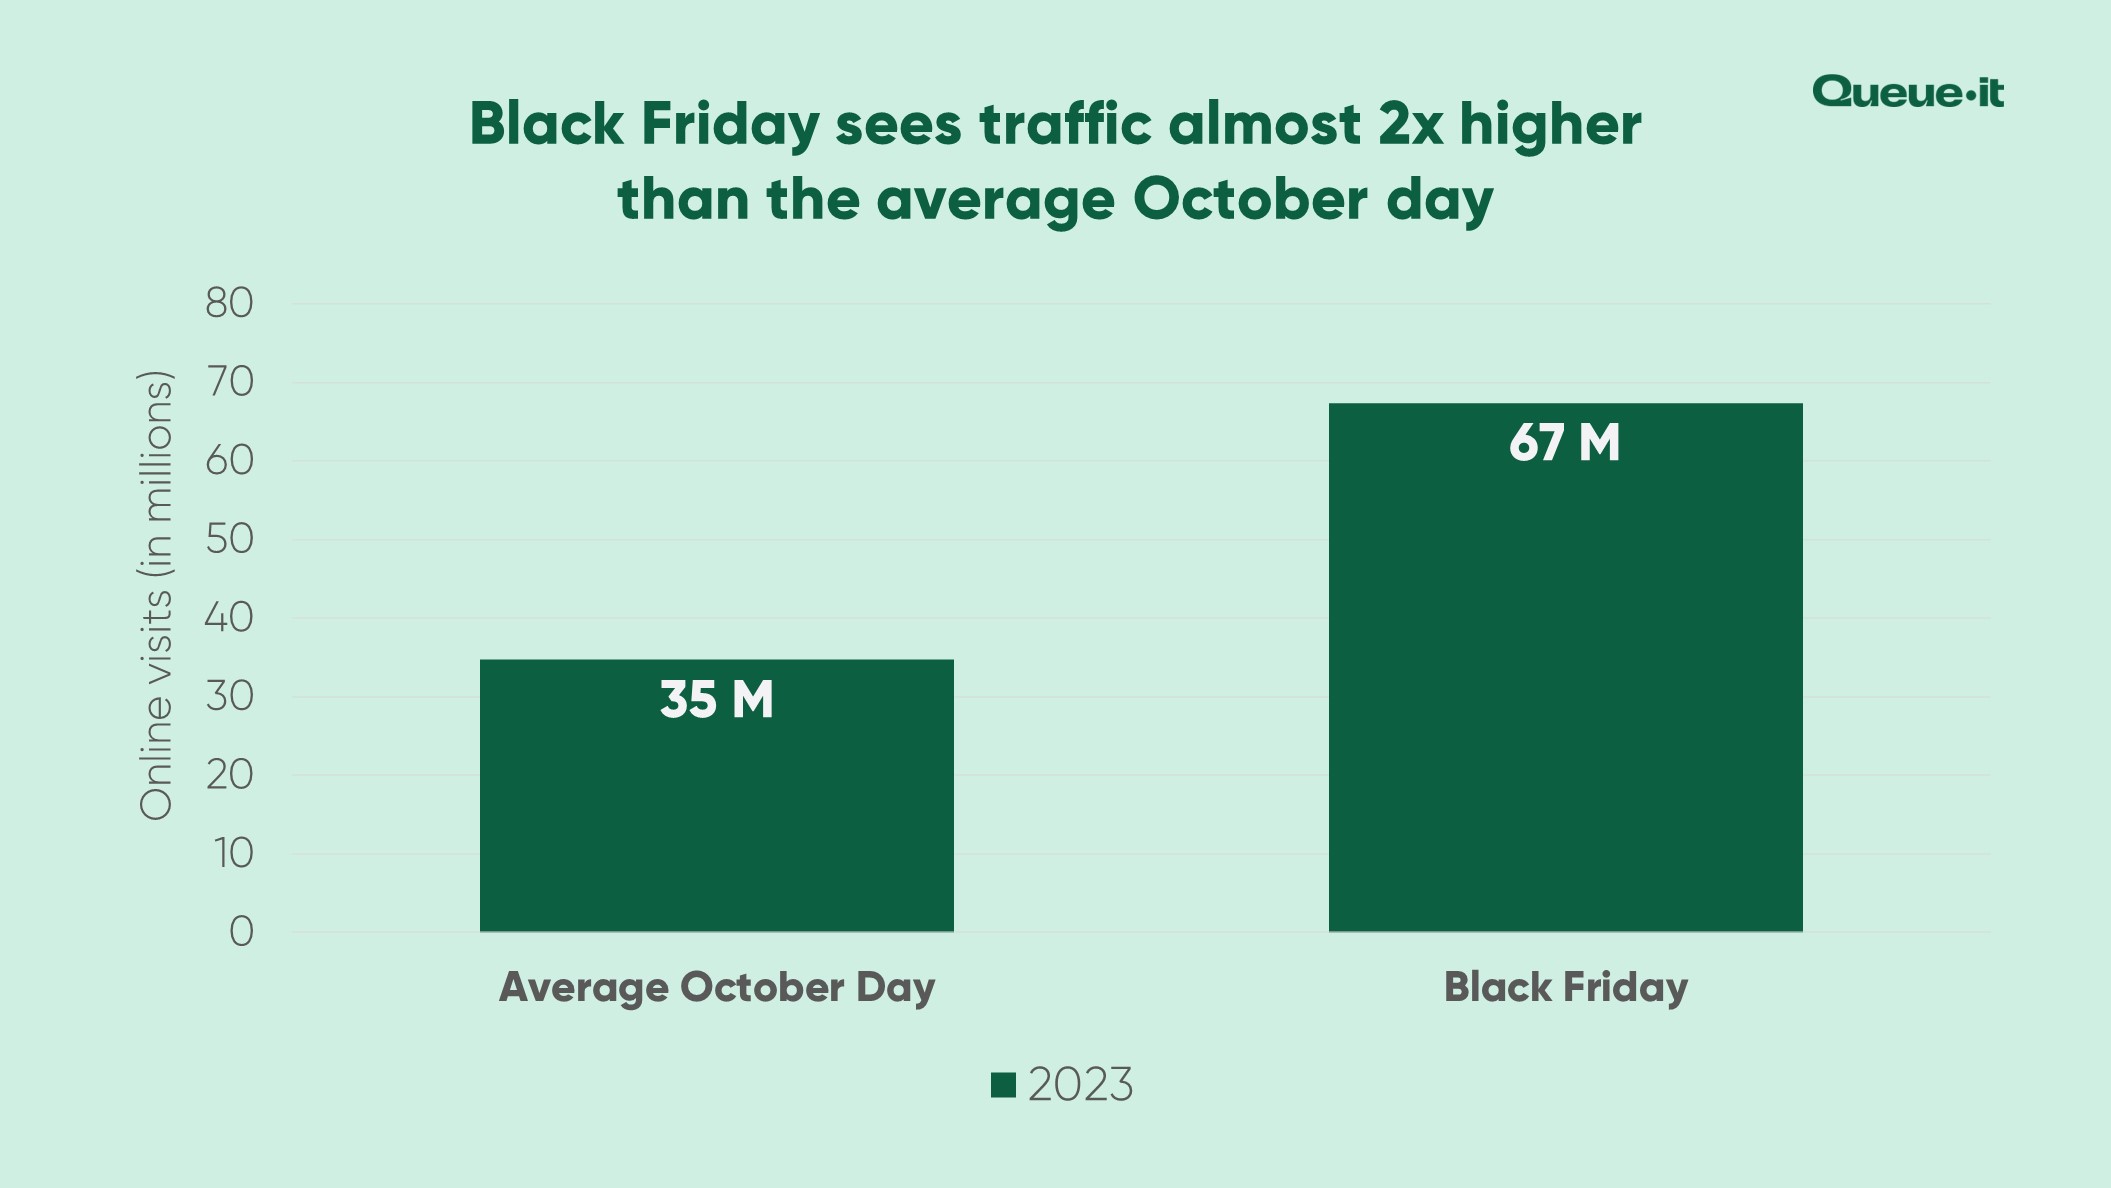 Black Friday sees traffic 2x that of normal October day